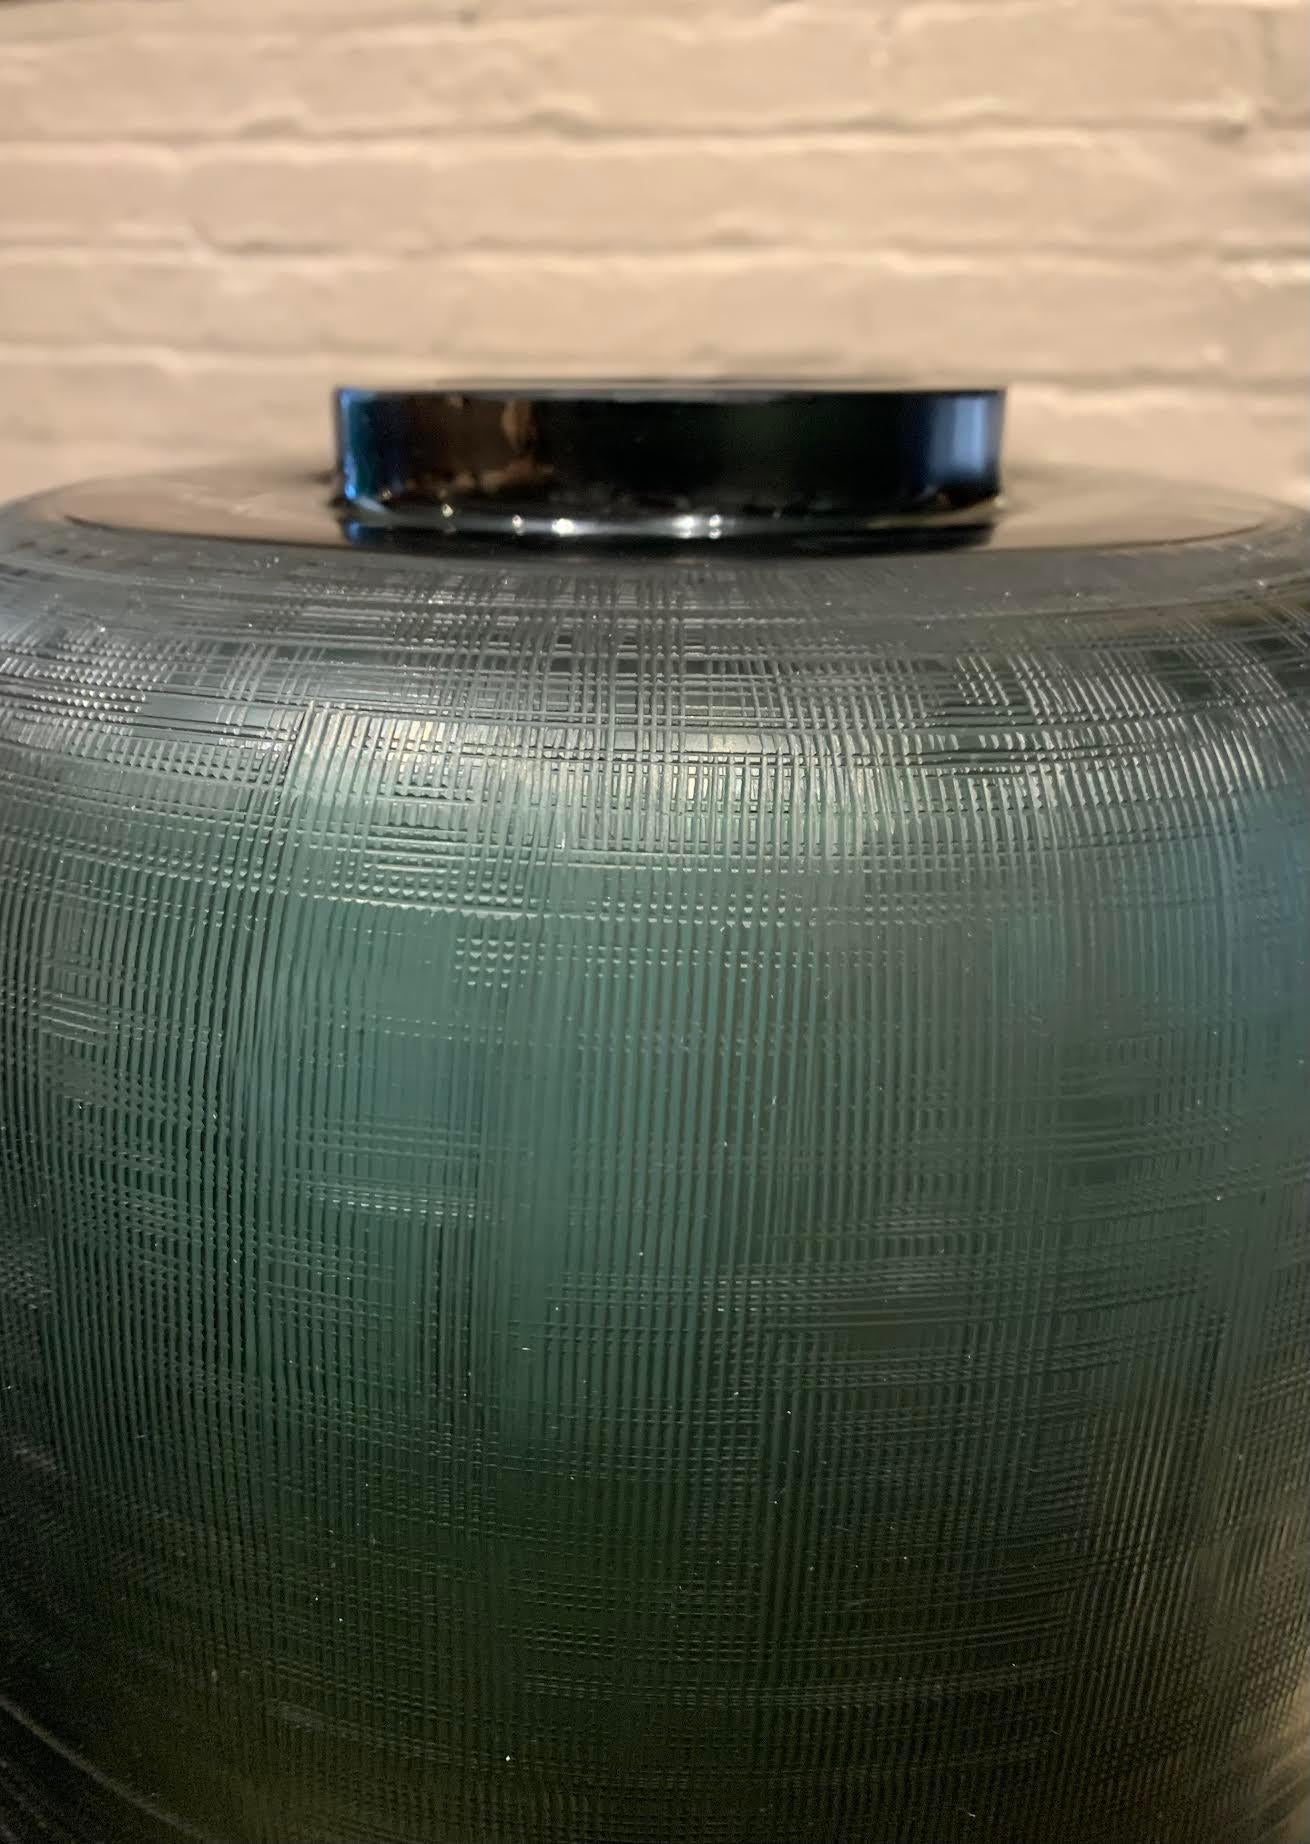 Contemporary Romanian deep blue glass vase with vertical rib decorative detail.
Can hold water.
From a collection of other deep blue glass vases and bowls (S6281 thru S6287).